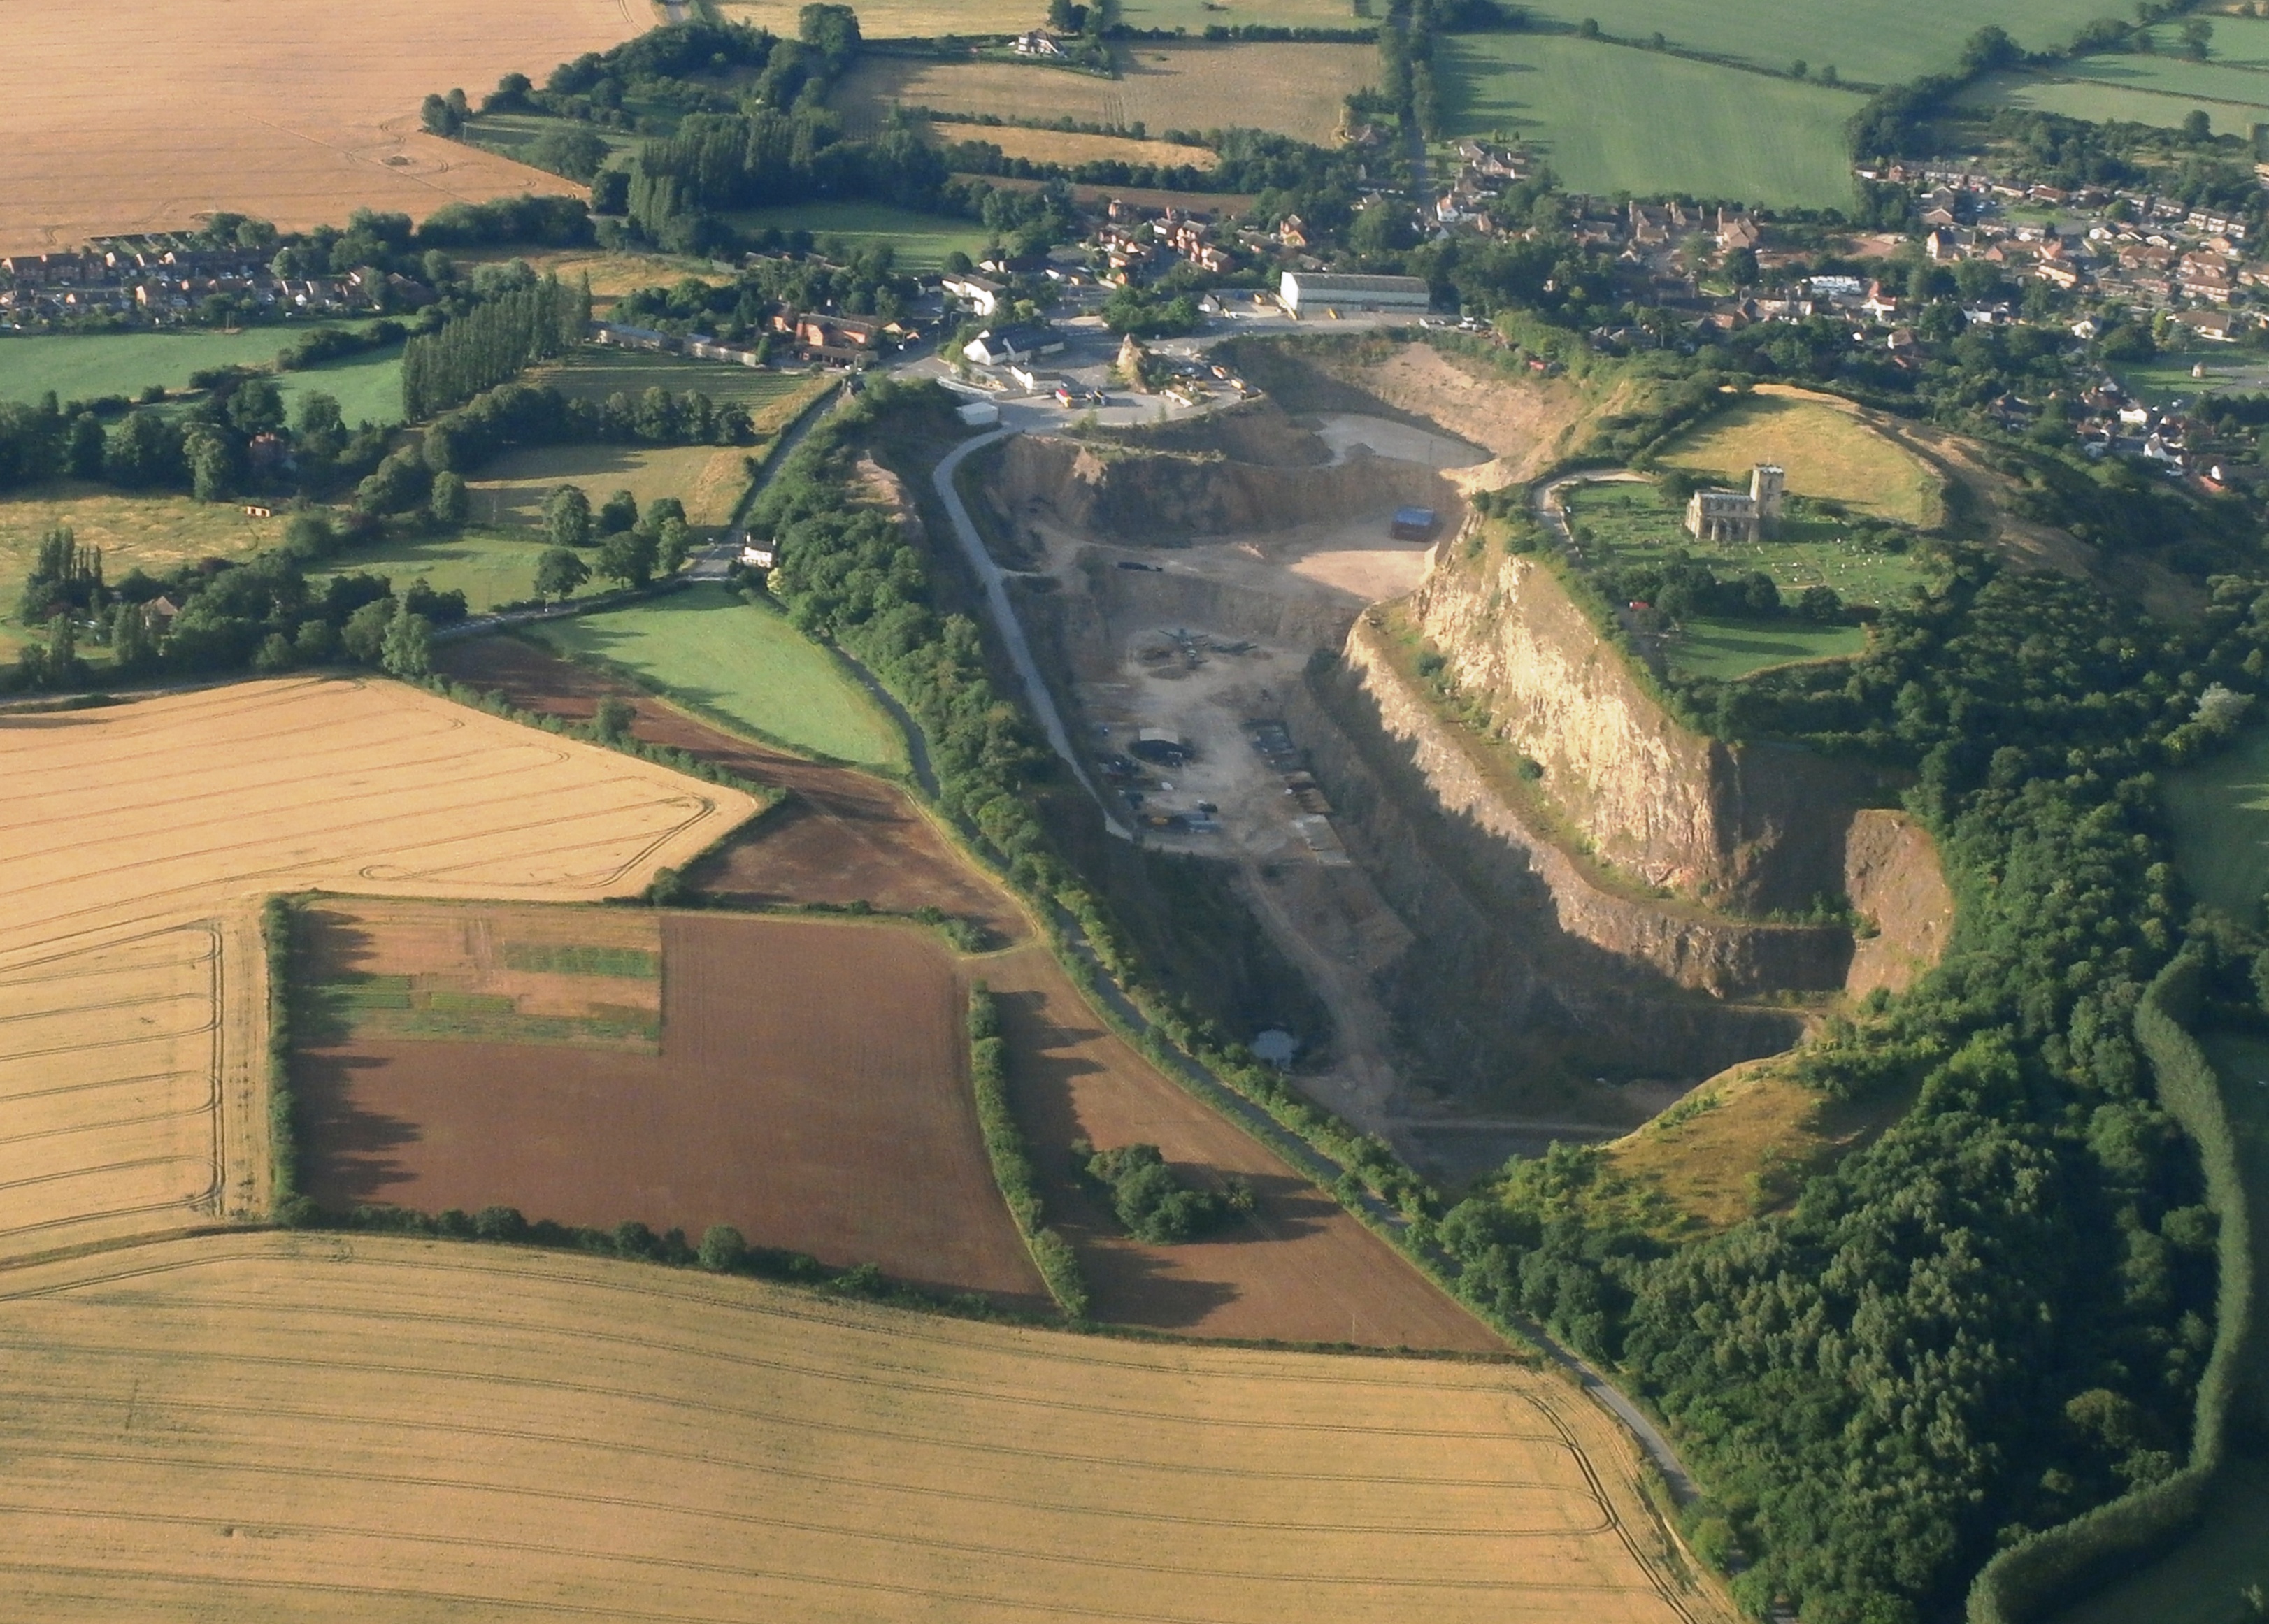 Aerial view of Breedon Hill, showing fields and the site on a hill with a large chunk missing where the quarry now islarge quarry 